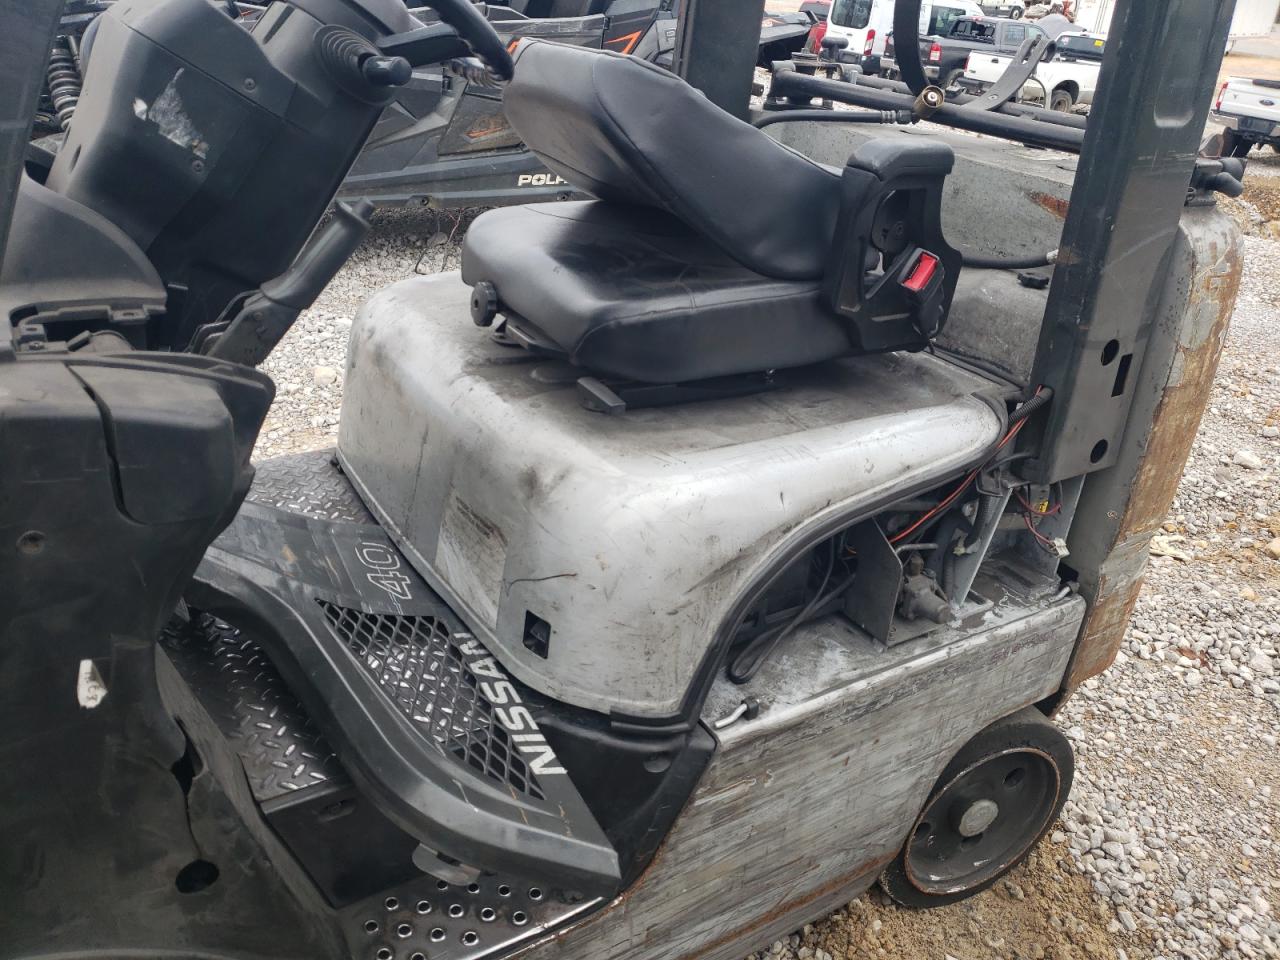 CP1F29W**** Repairable 2012 Nissan Forklift in AL - Hueytown